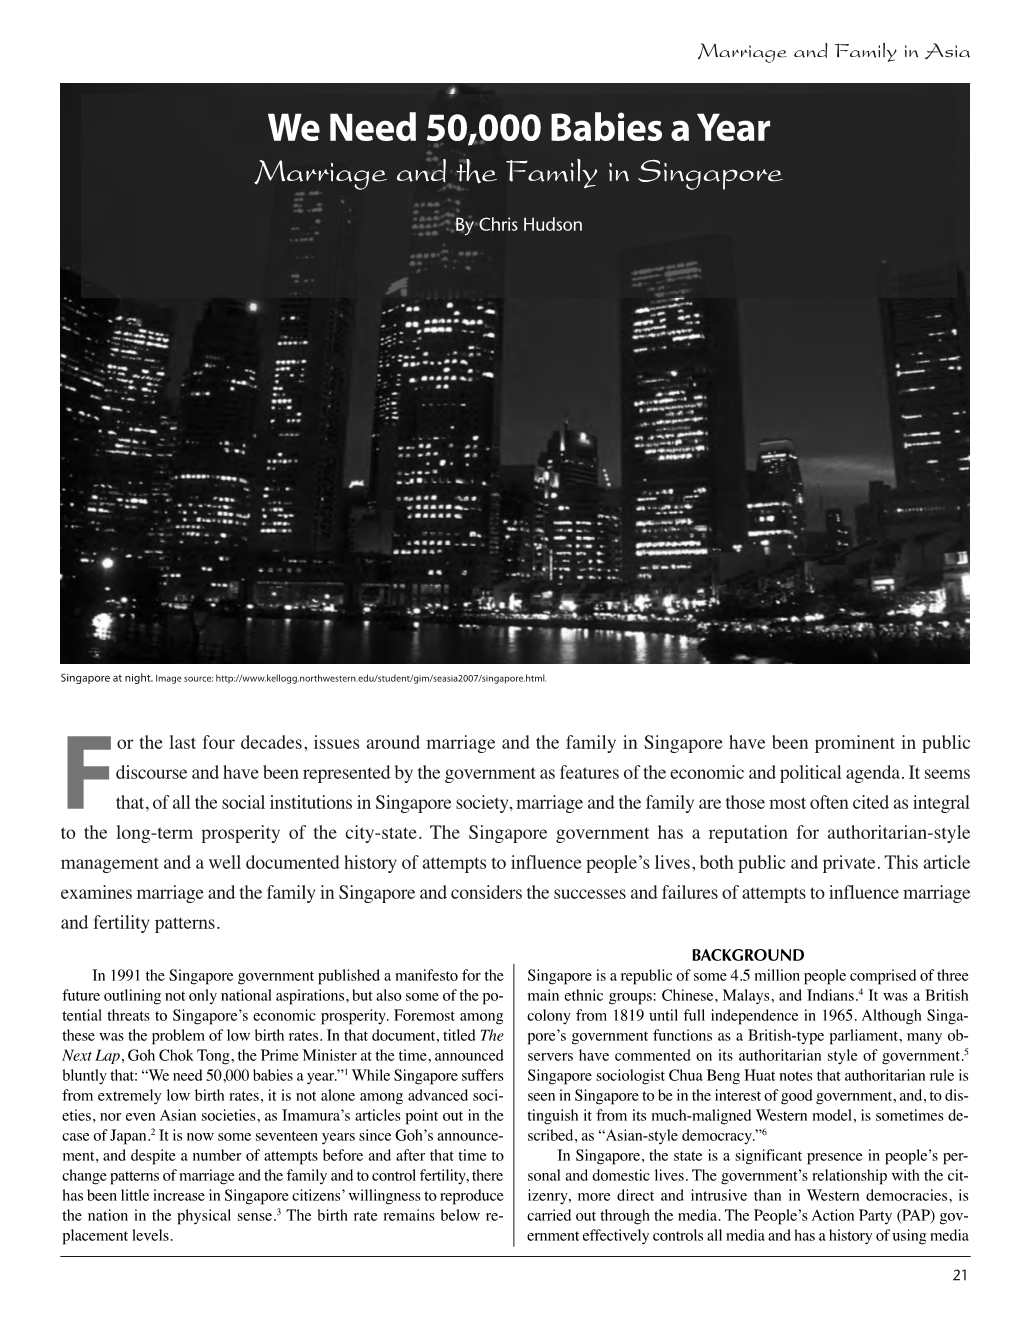 Marriage and the Family in Singapore